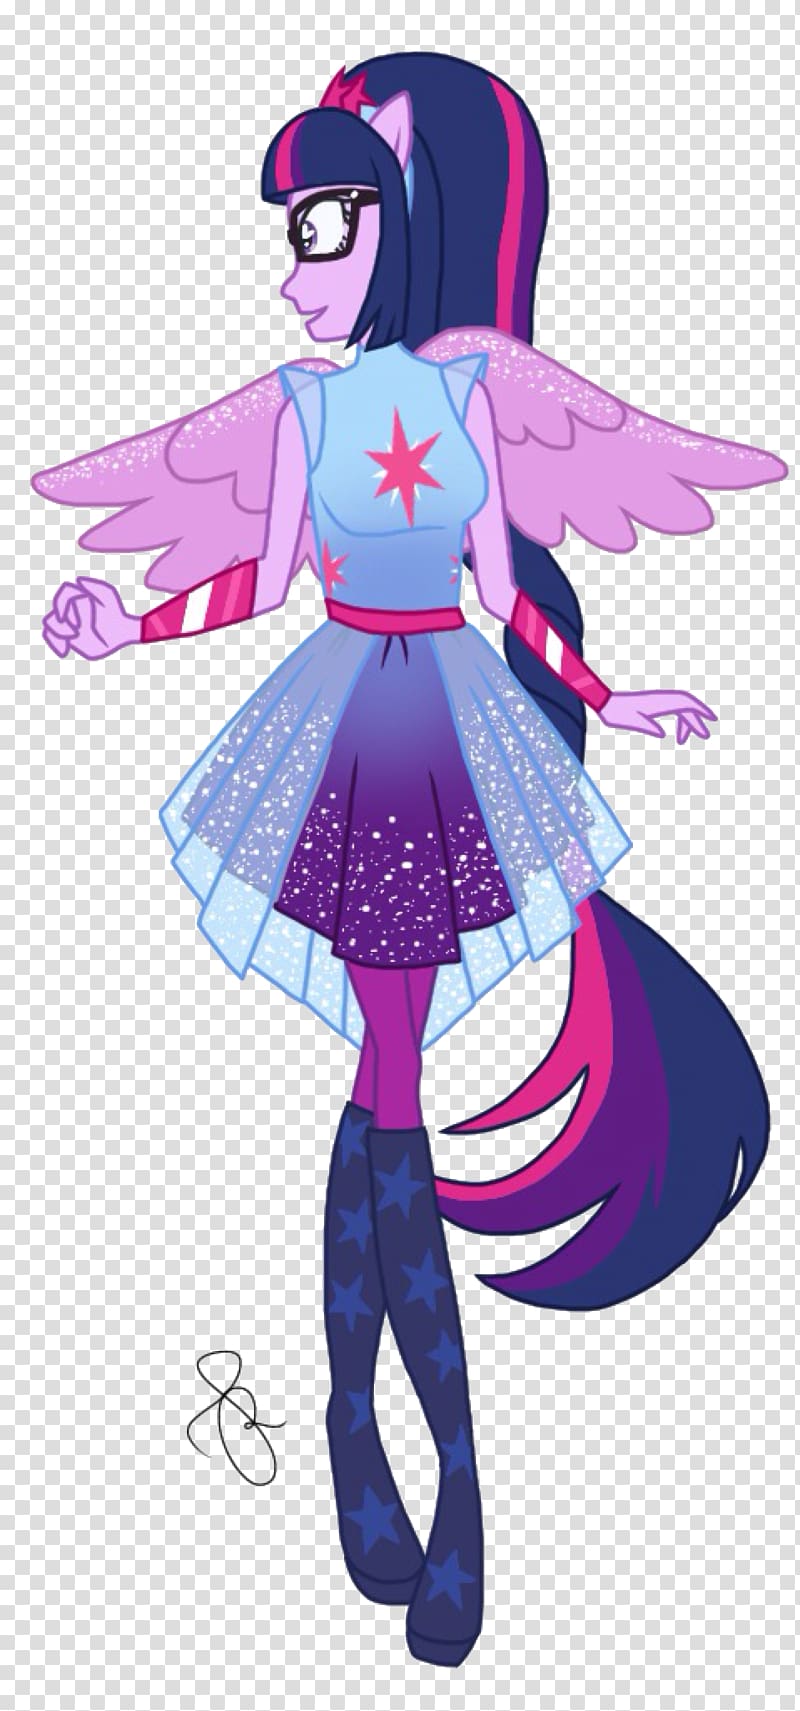 Twilight Sparkle Sunset Shimmer My Little Pony: Equestria Girls, others transparent background PNG clipart